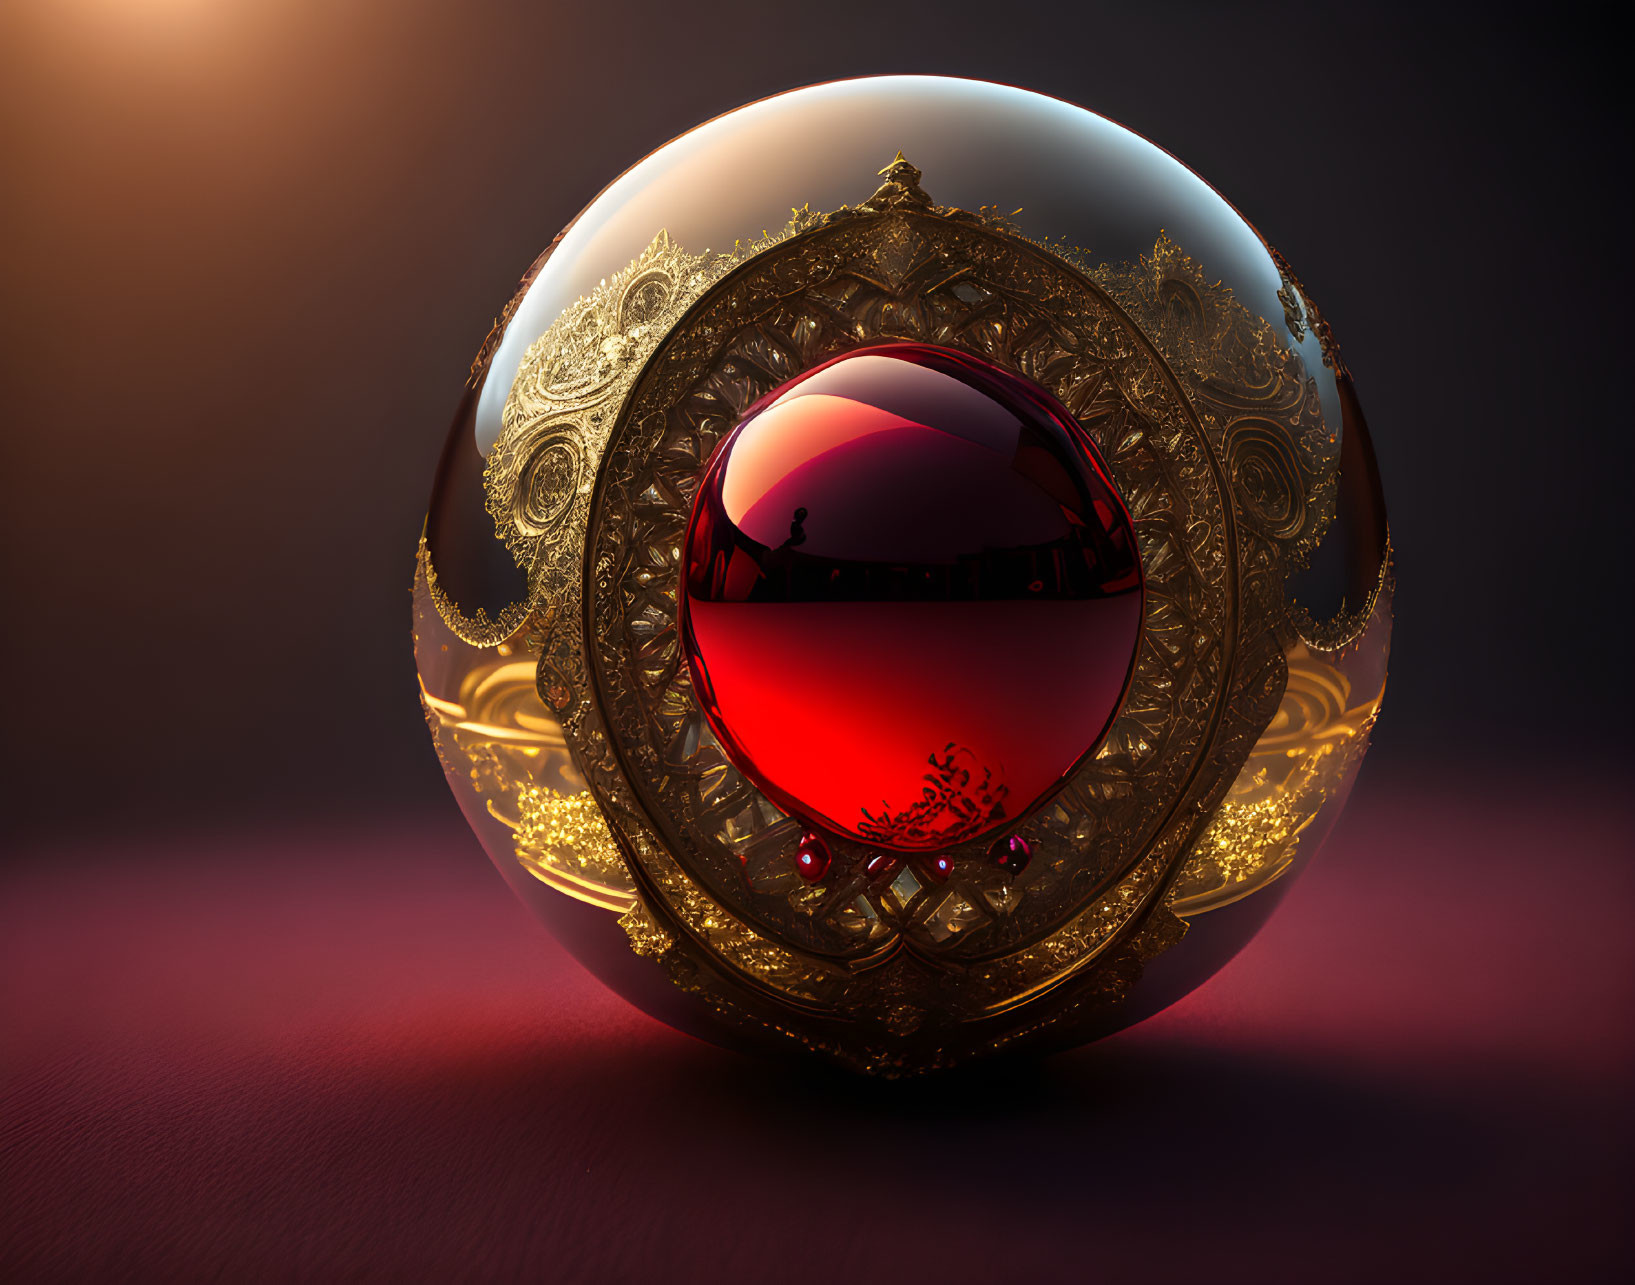 Golden filigree encircles red and clear orb on dark surface with warm backdrop